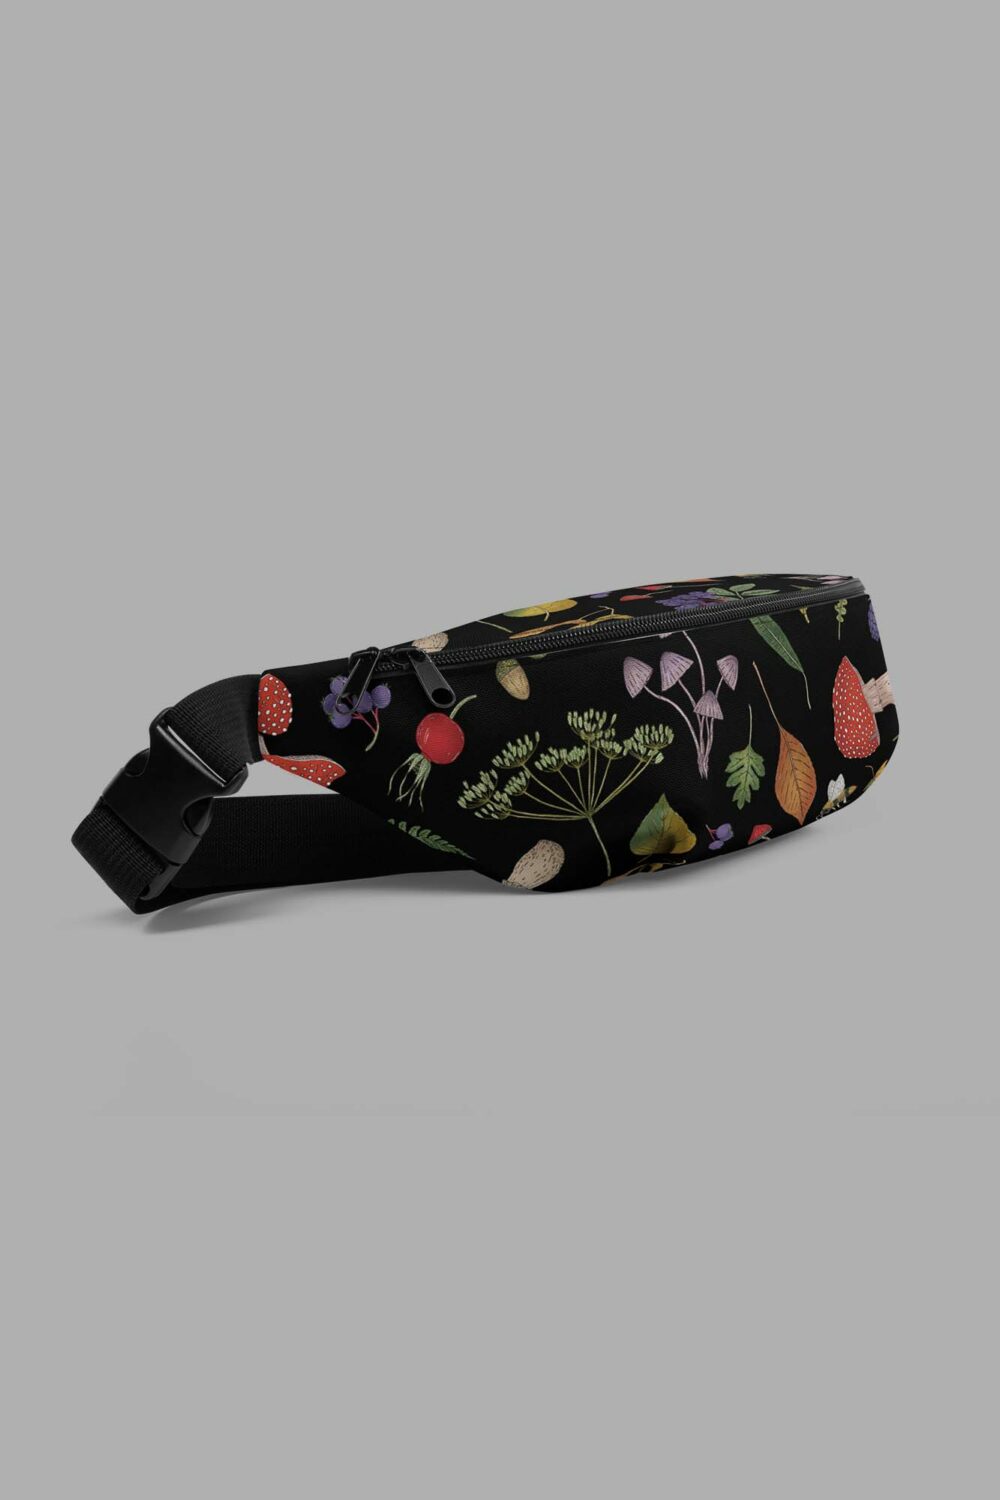 cosmic drifters hedge witch print fanny pack side